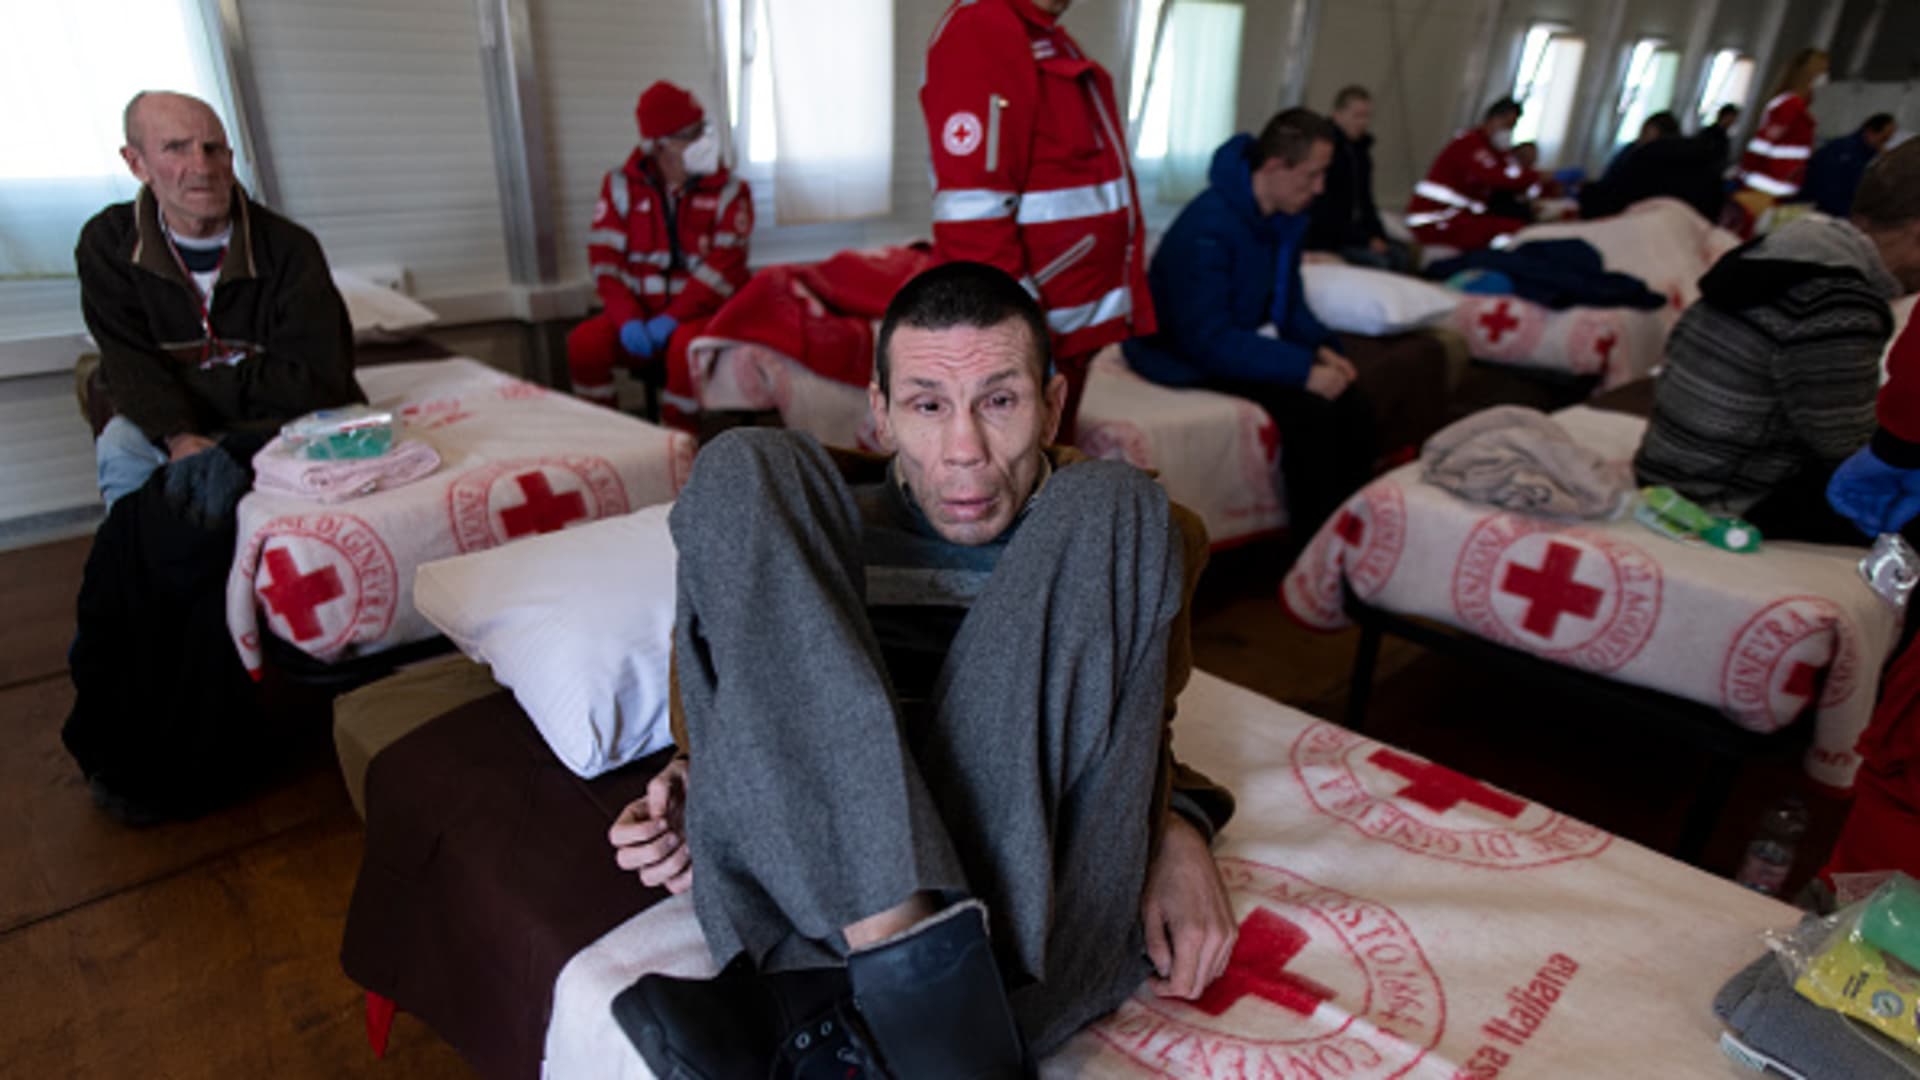 Ukrainian refugee looked after by Red Cross volunteers inside the Red Cross Headquarters on April 7, 2022 in Settimo Torinese near Turin, Italy.